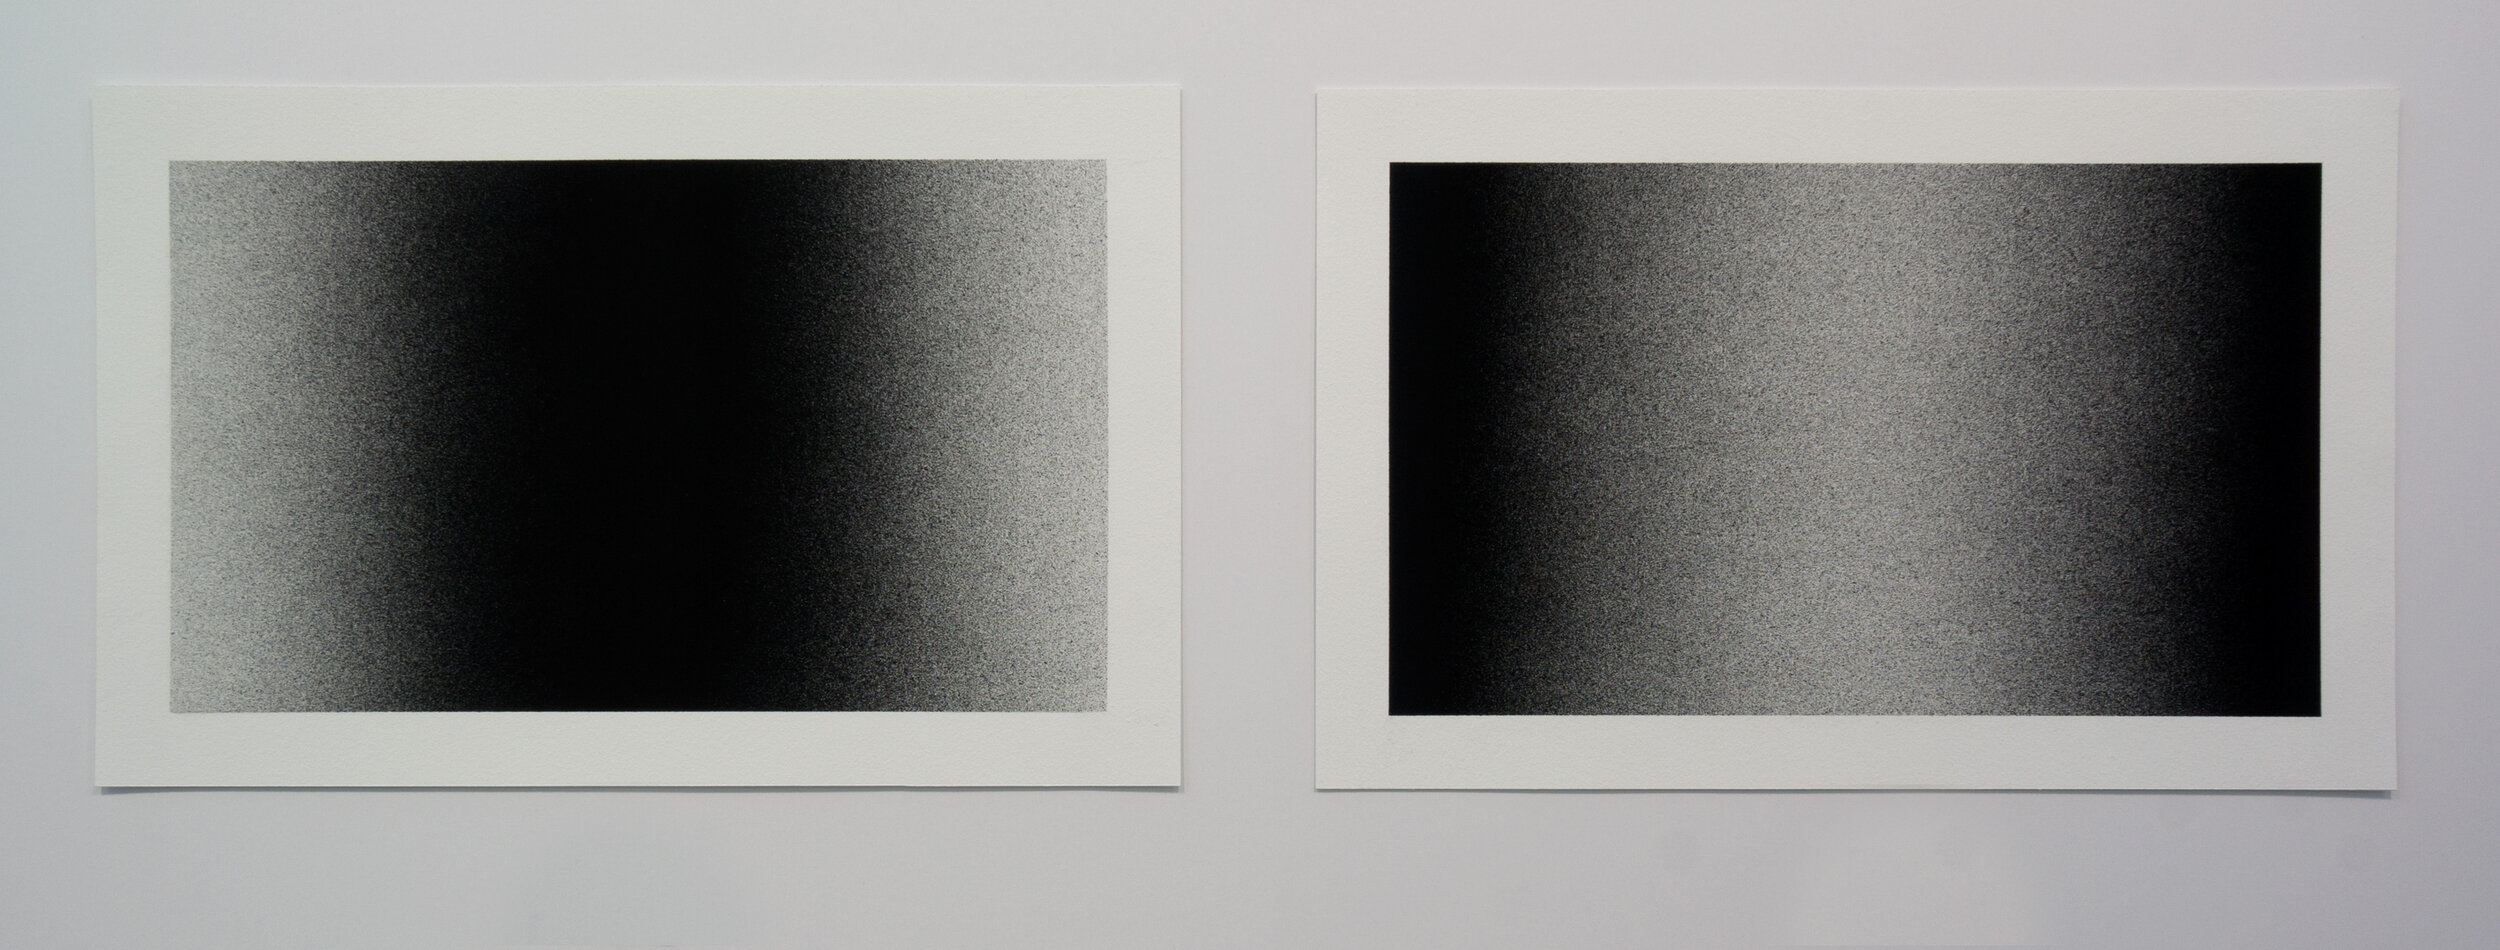  Fuzz   diptych, edition of 5   Ultra-Flat Black spray paint on Paper  9x14 ea. 